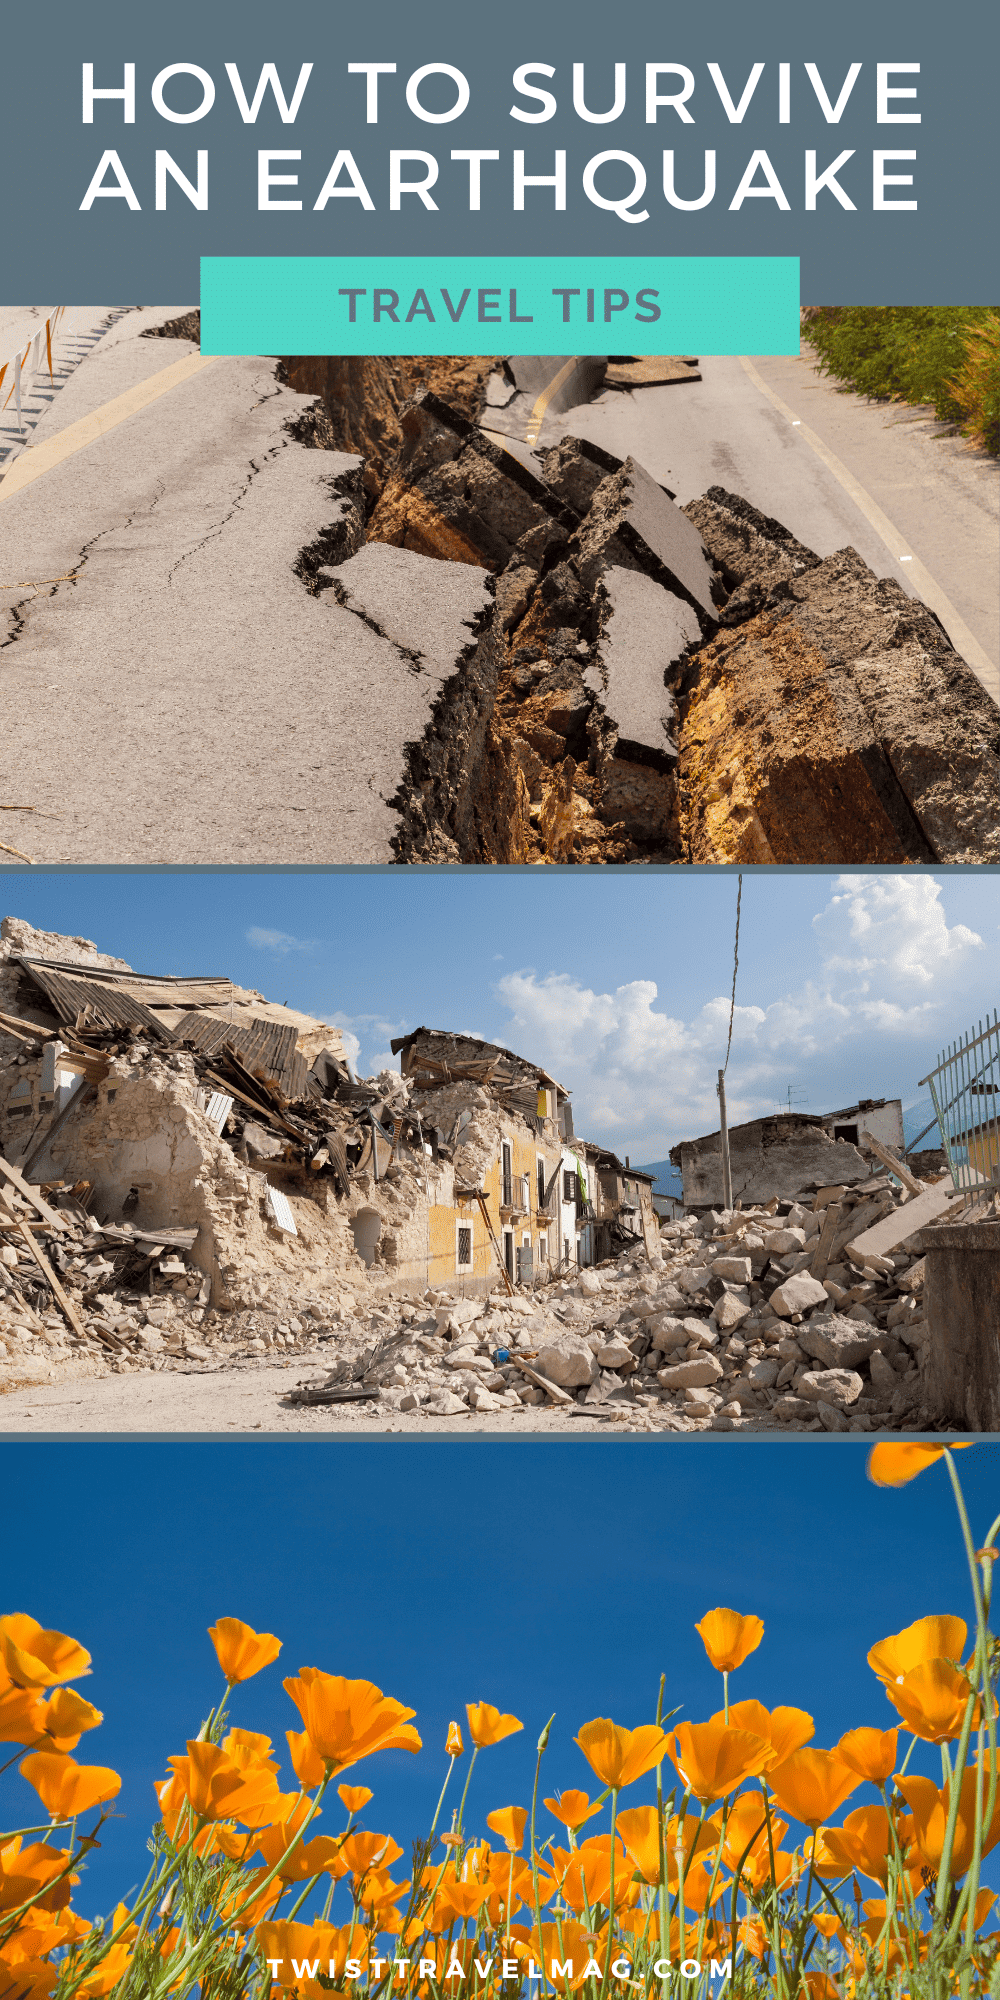 What to do if you experience an earthquake when traveling